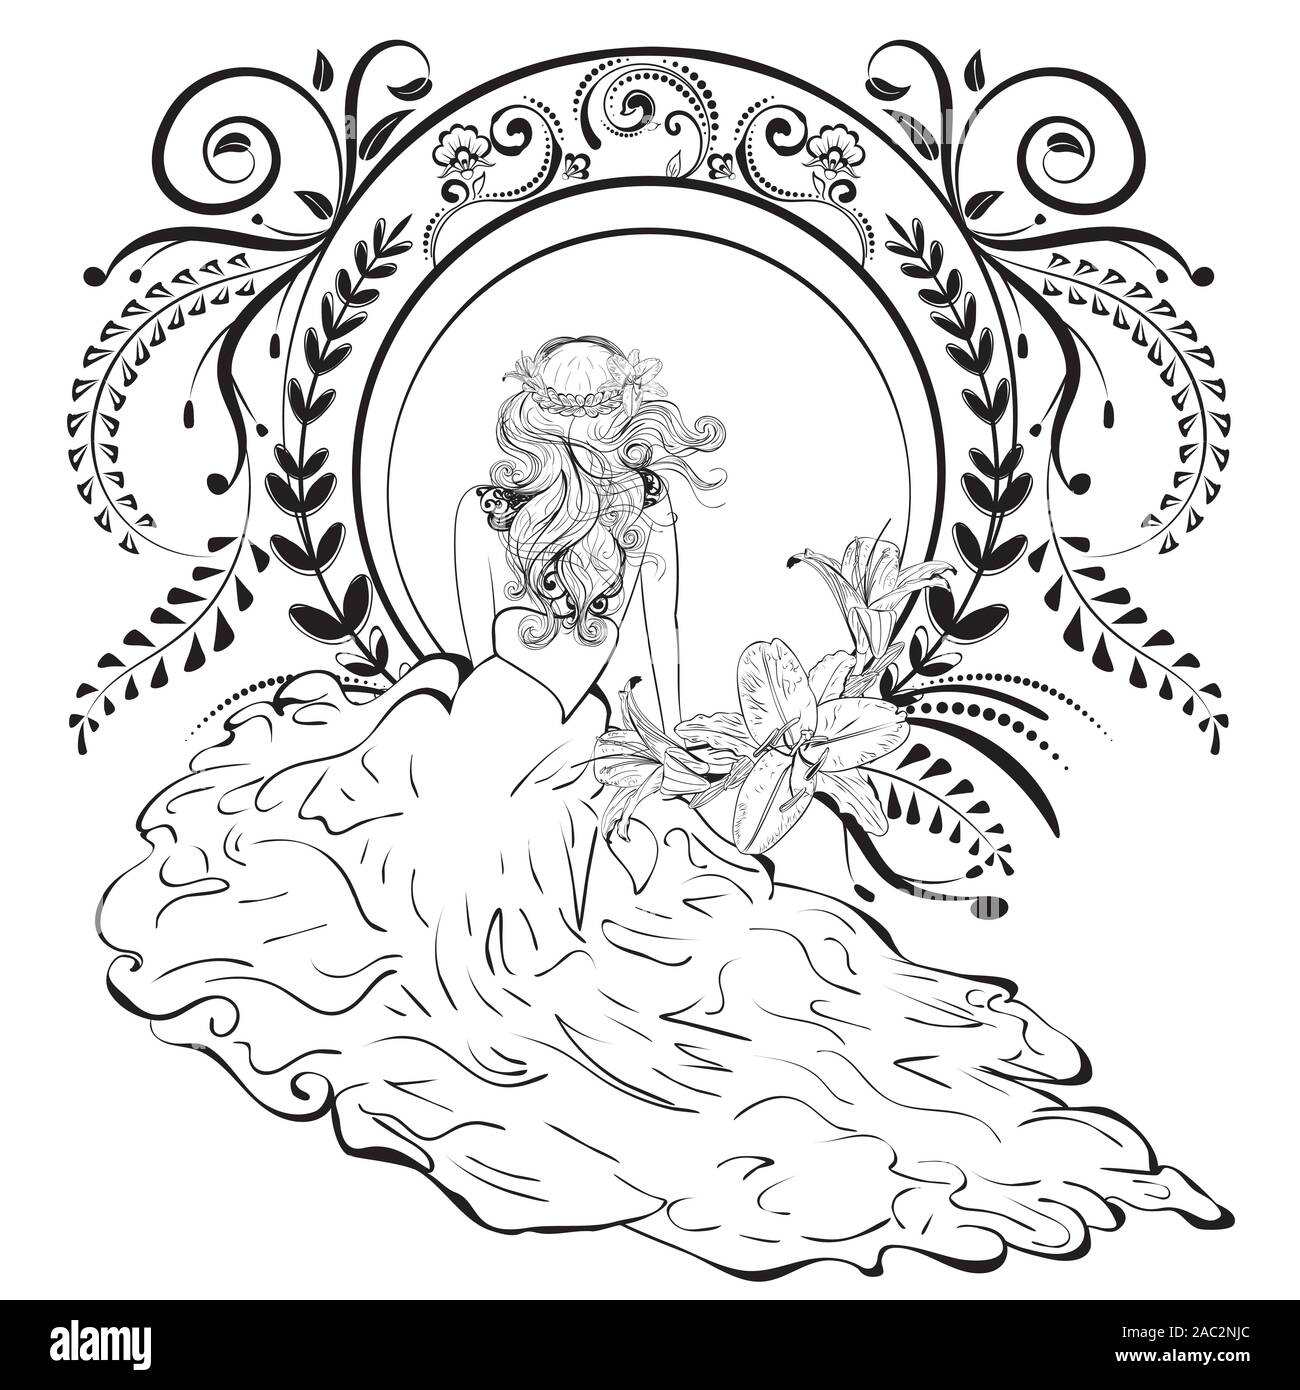 Vintage illustration with girl sits in fluffy bridal gown and floral ornaments, art nouveau inspired art. Stock Vector